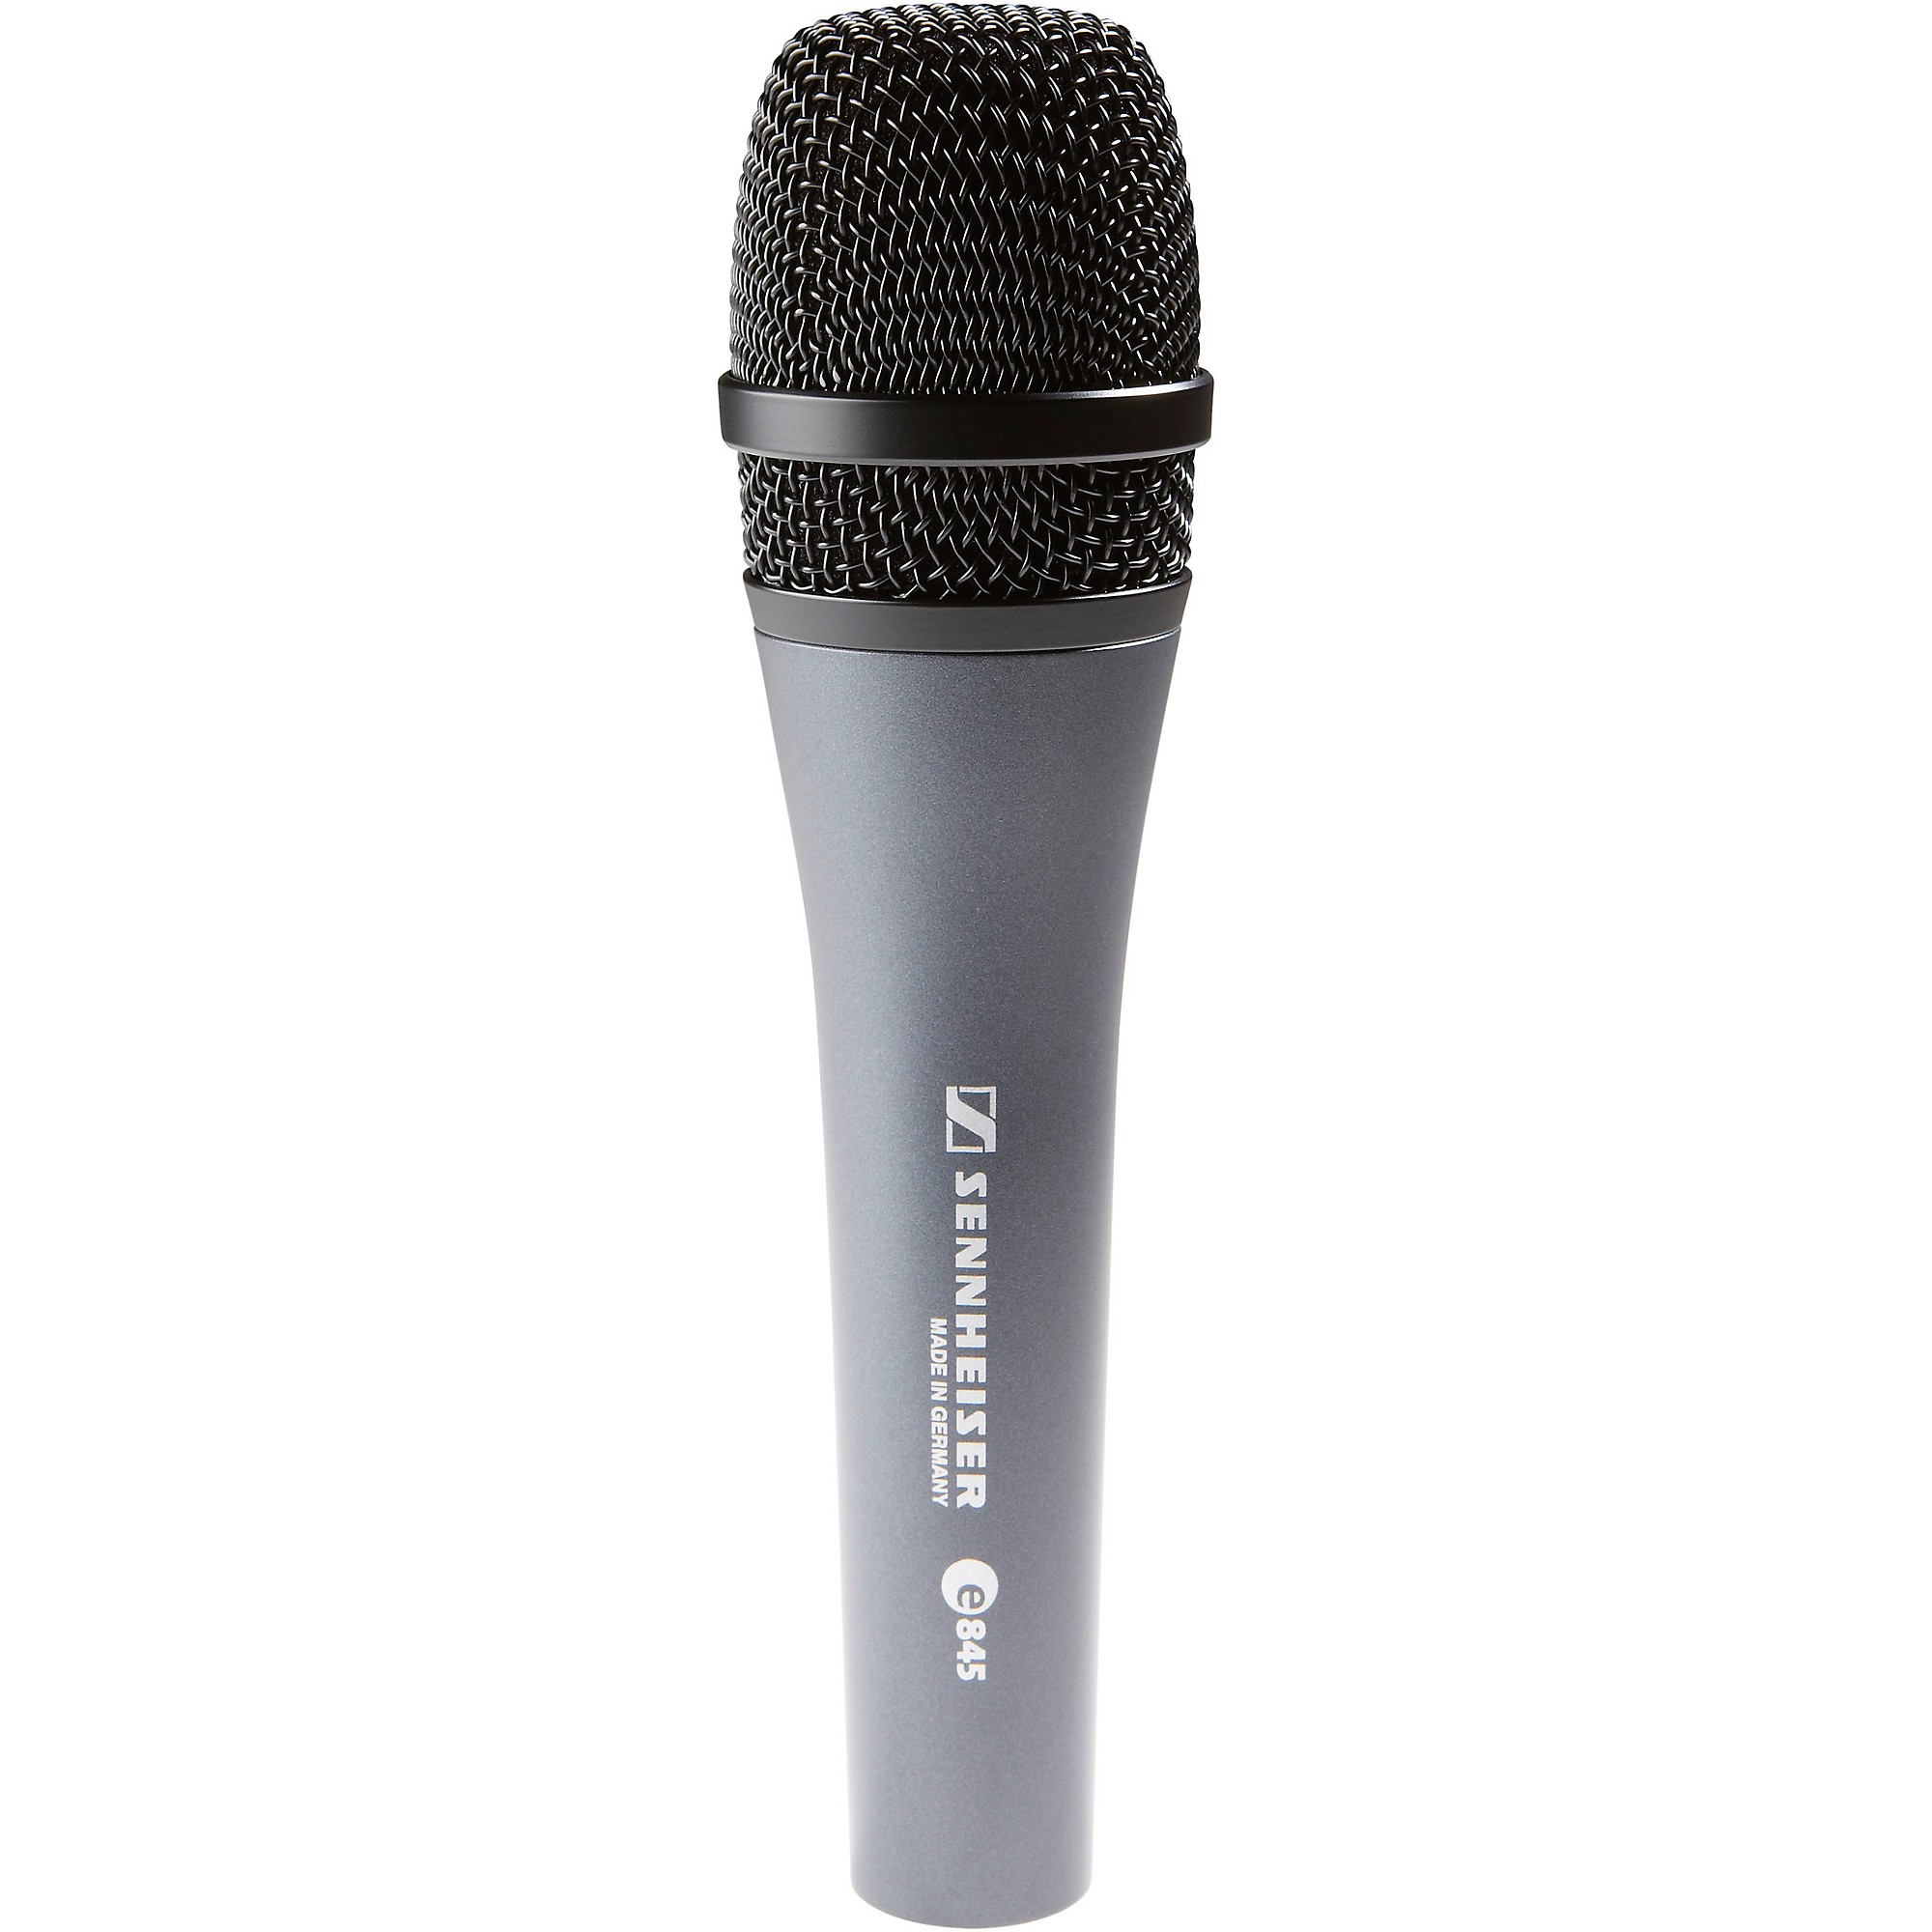 Sennheiser e845 Extended High Frequency Response Supercardioid Microphone 